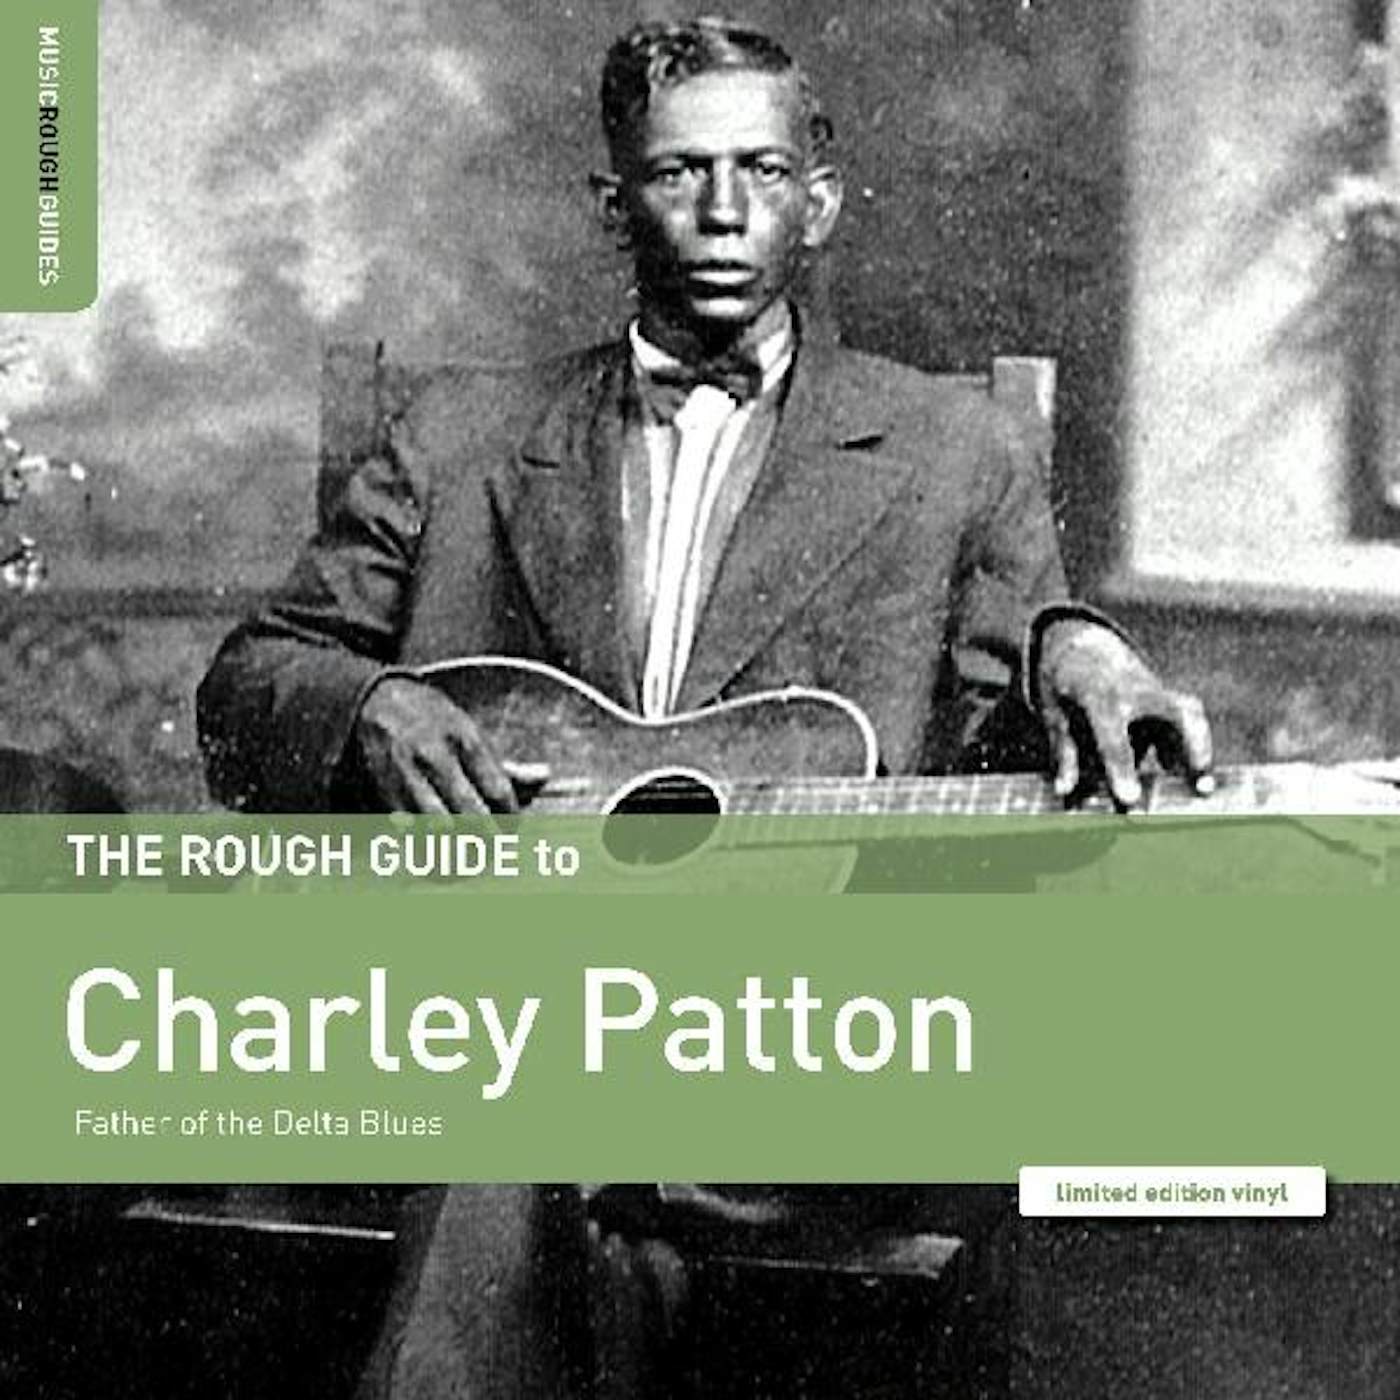 ROUGH GUIDE TO CHARLEY PATTON / FATHER OF THE DELTA BLUES Vinyl Record